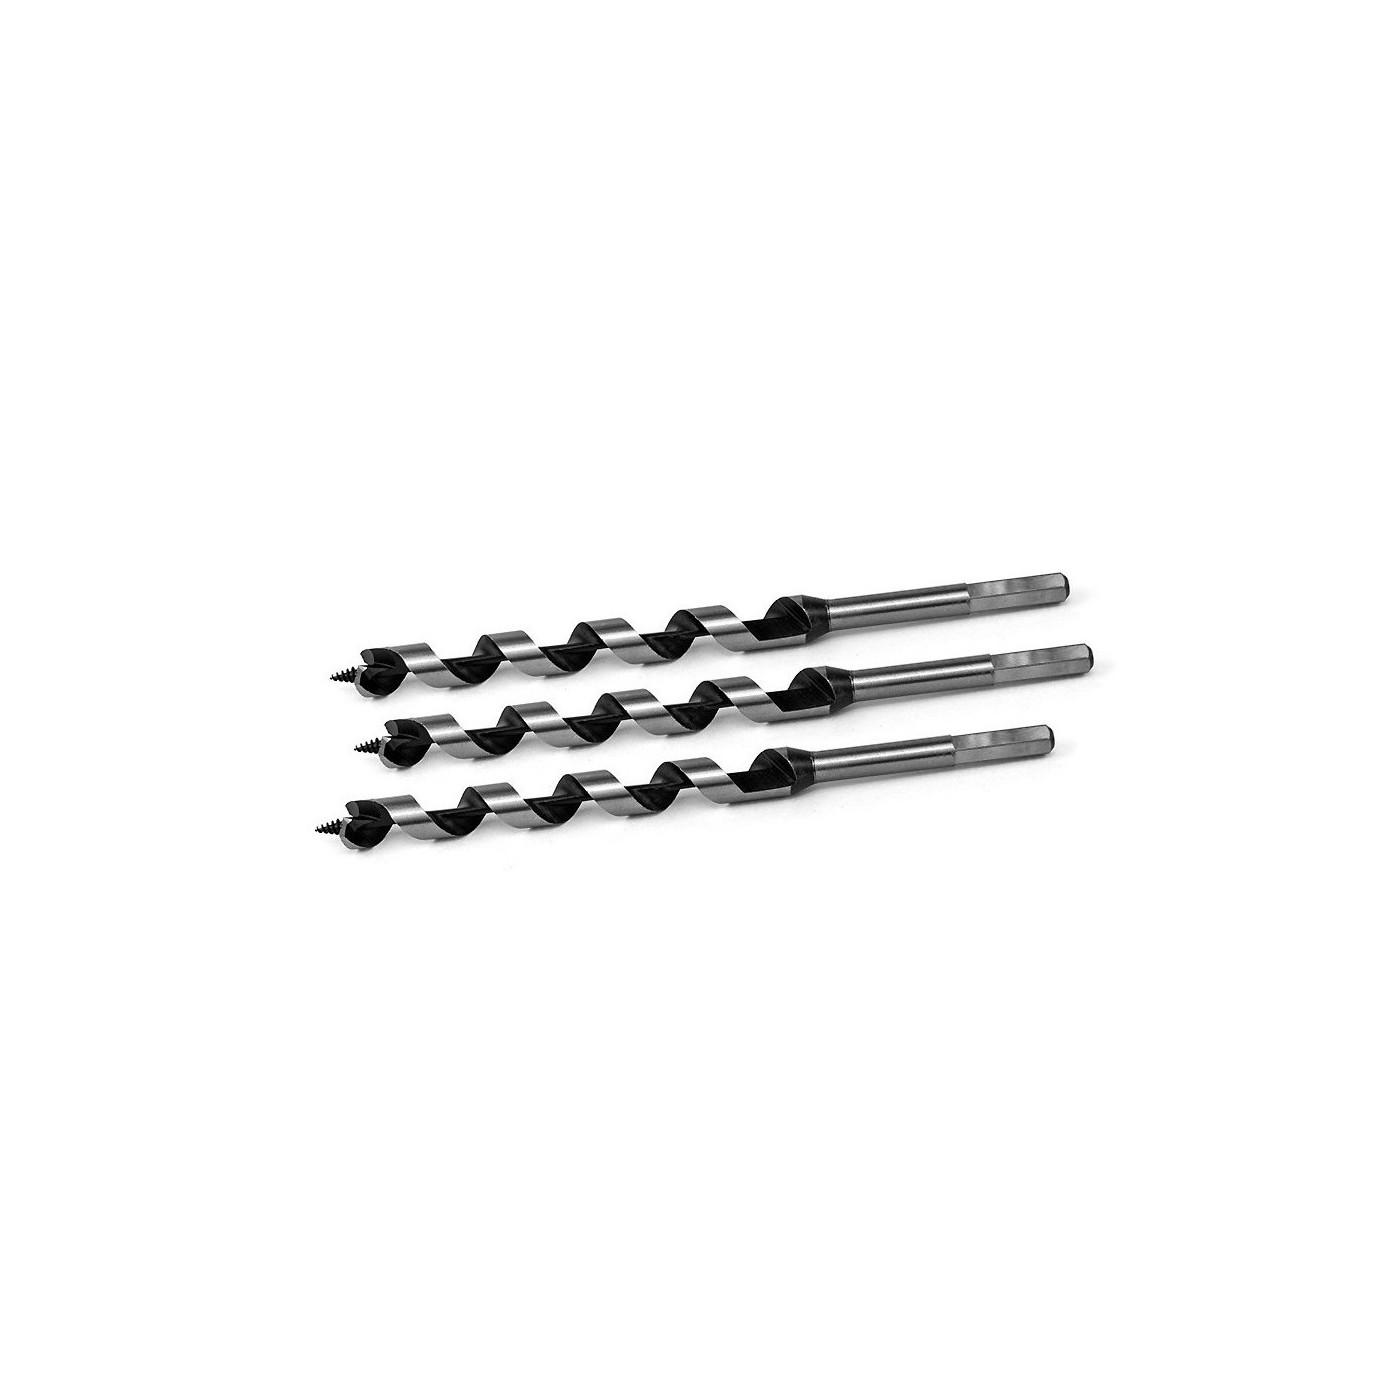 Set of 3 auger drill bits for wood, 18x230 mm